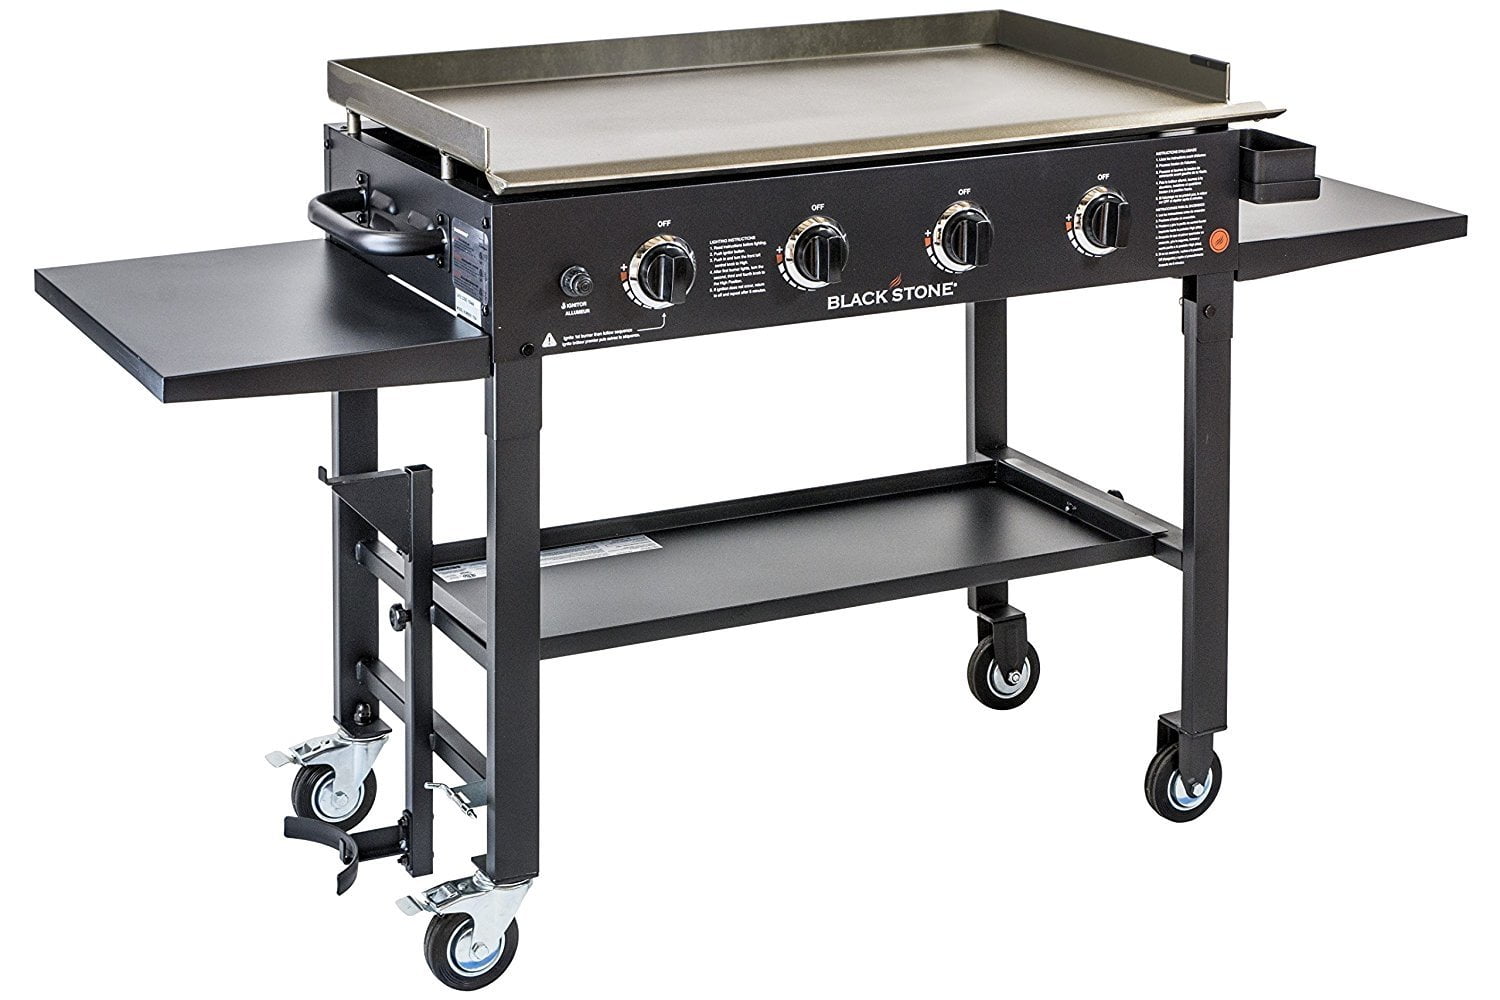 New Blackstone 36 inch 4 Burner Propane Gas Griddle Stainless Steel 1565 